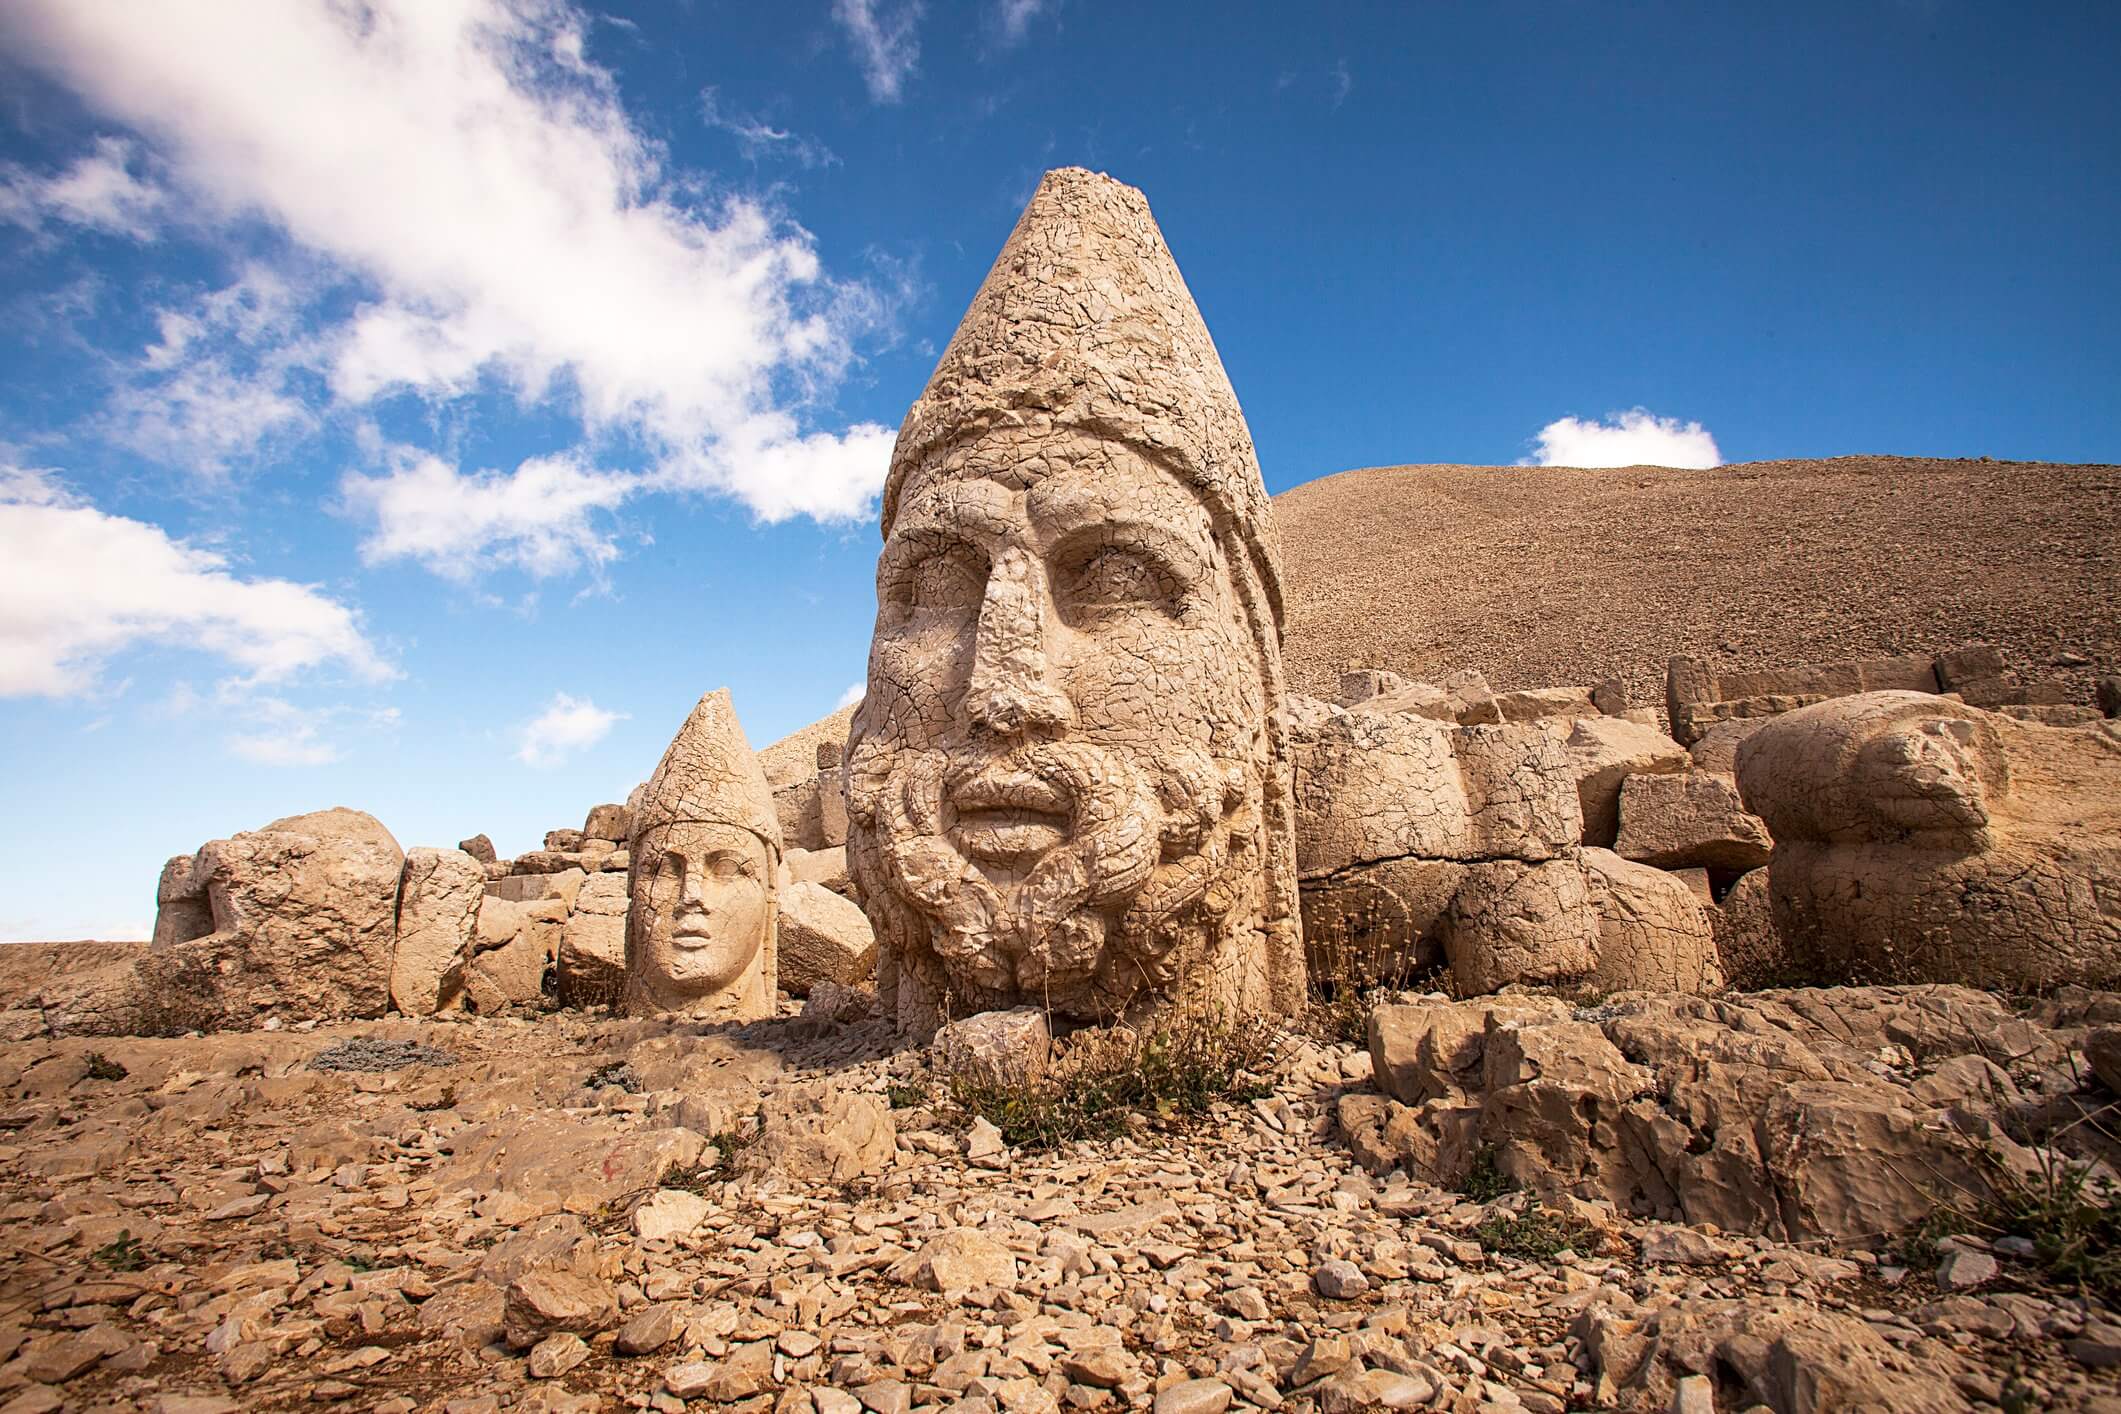 Ancient statues on top of Mount Nemrut in South East Turkey.